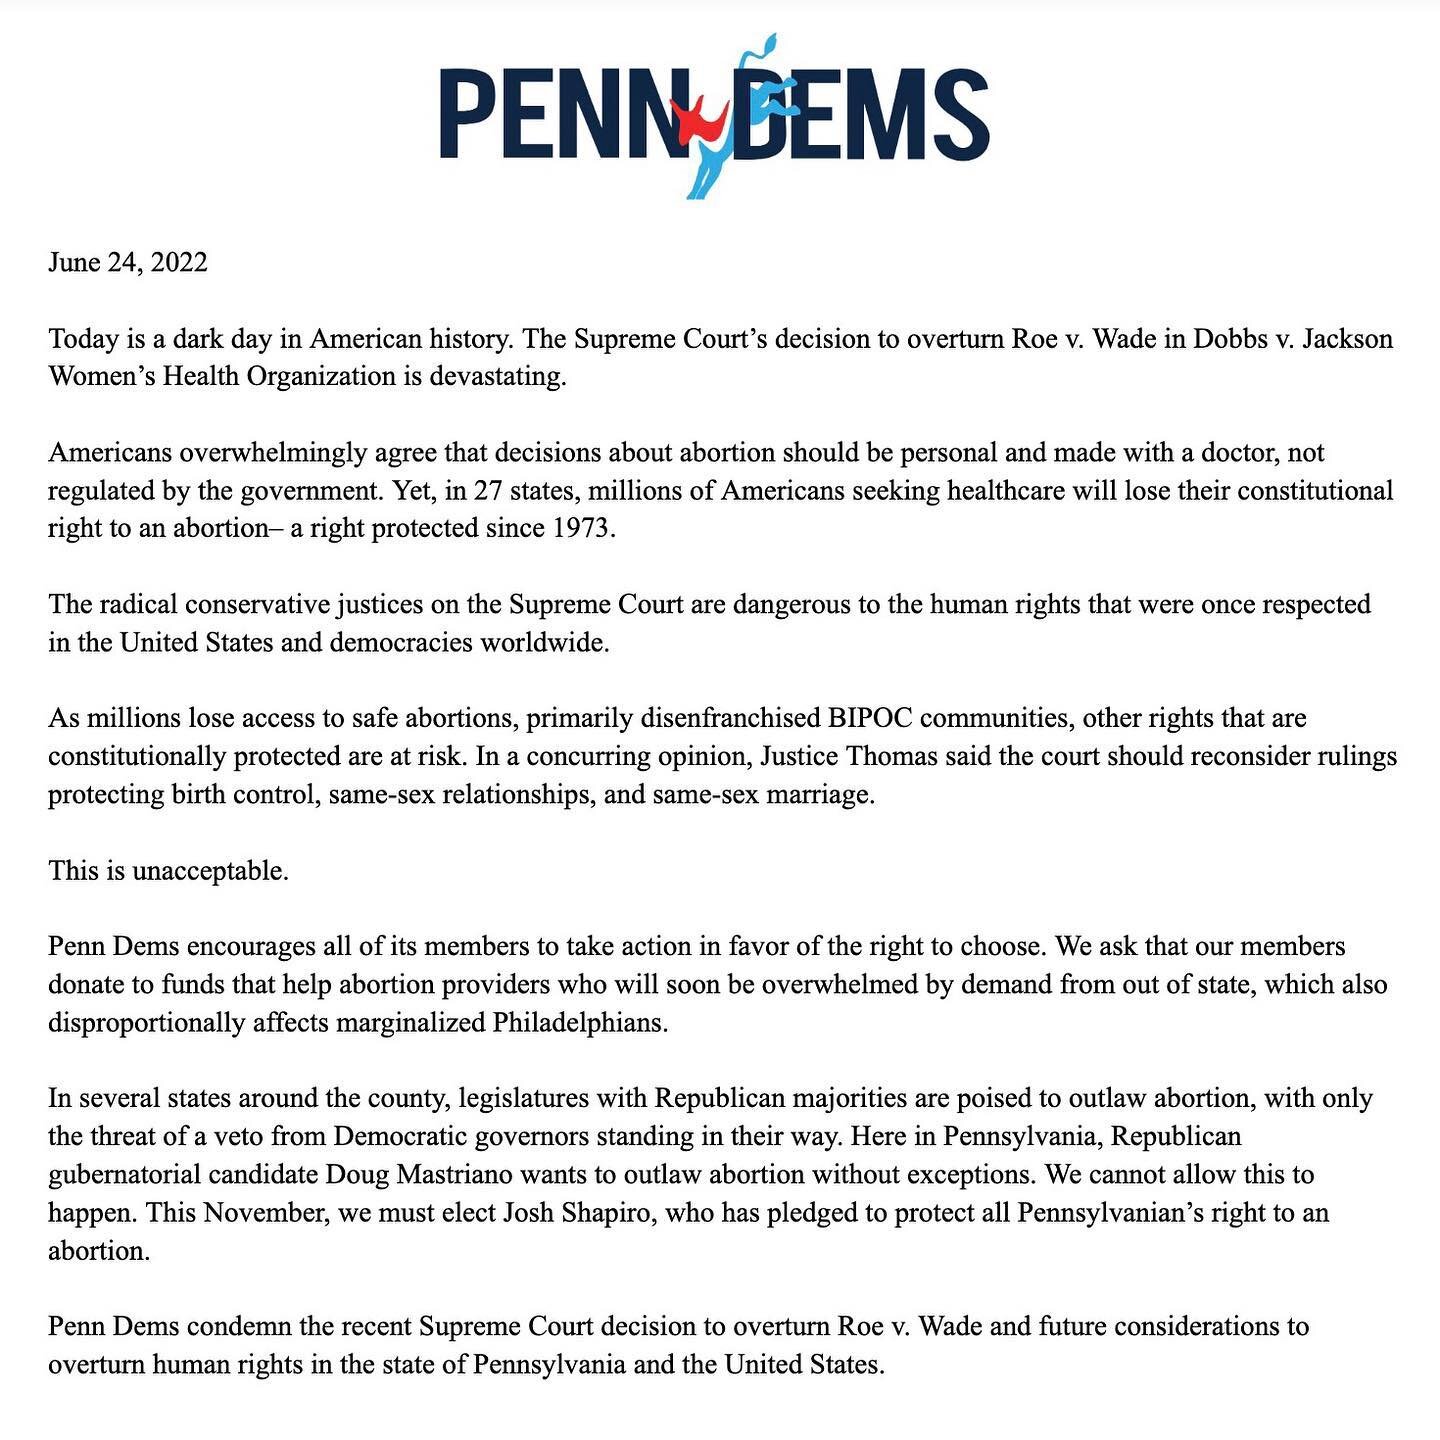 Penn Dems condemn the recent Supreme Court decision to overturn Roe v. Wade